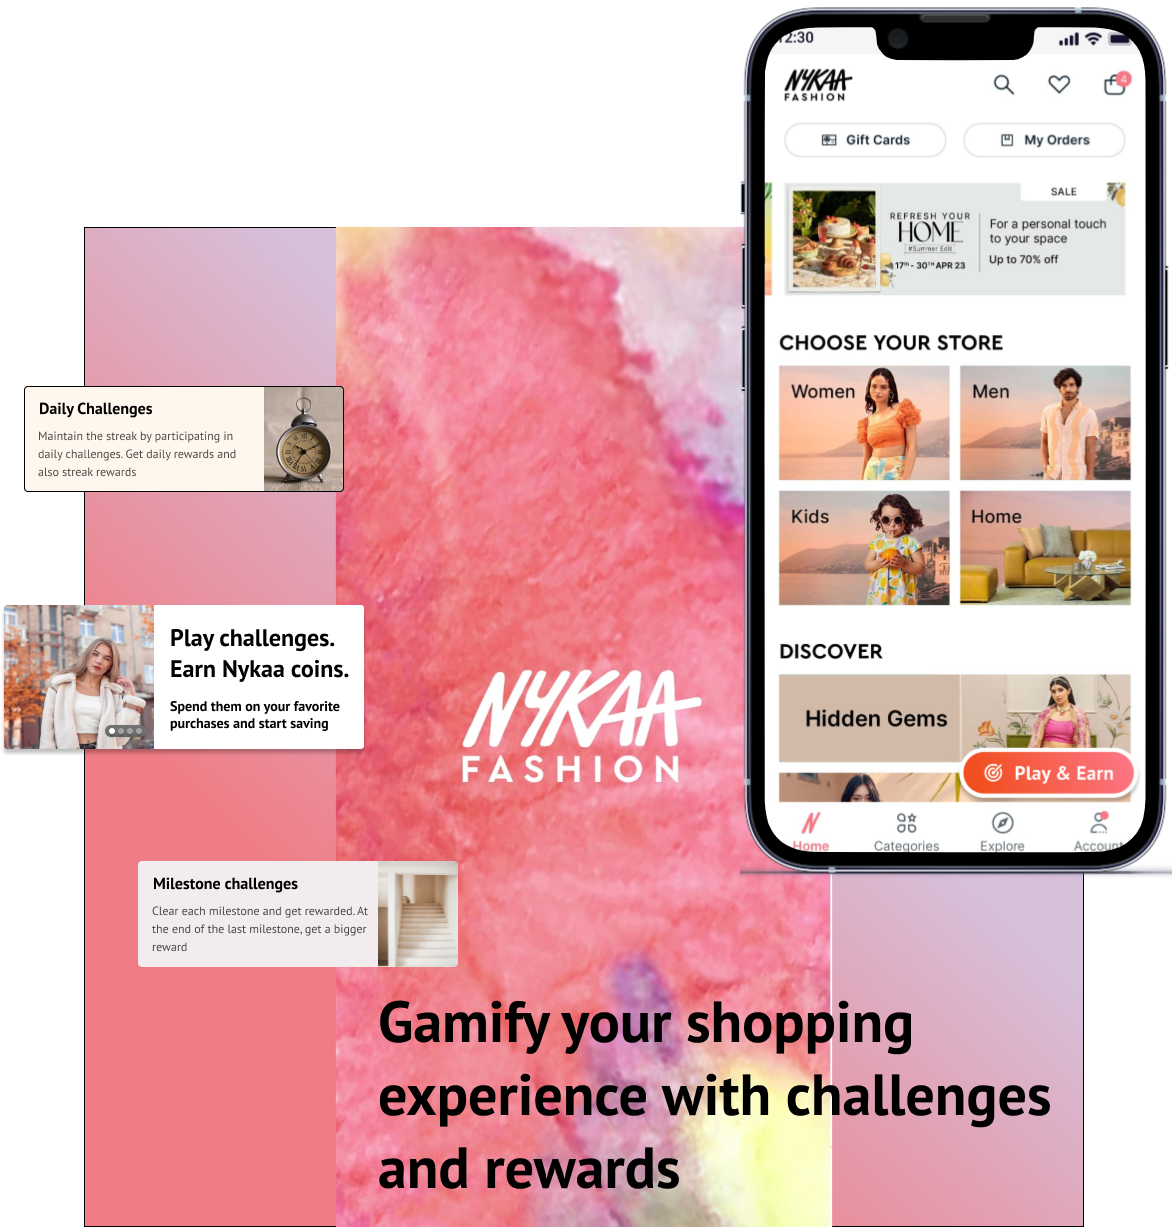 Gamifying the shopping experience by introducing challenges in the